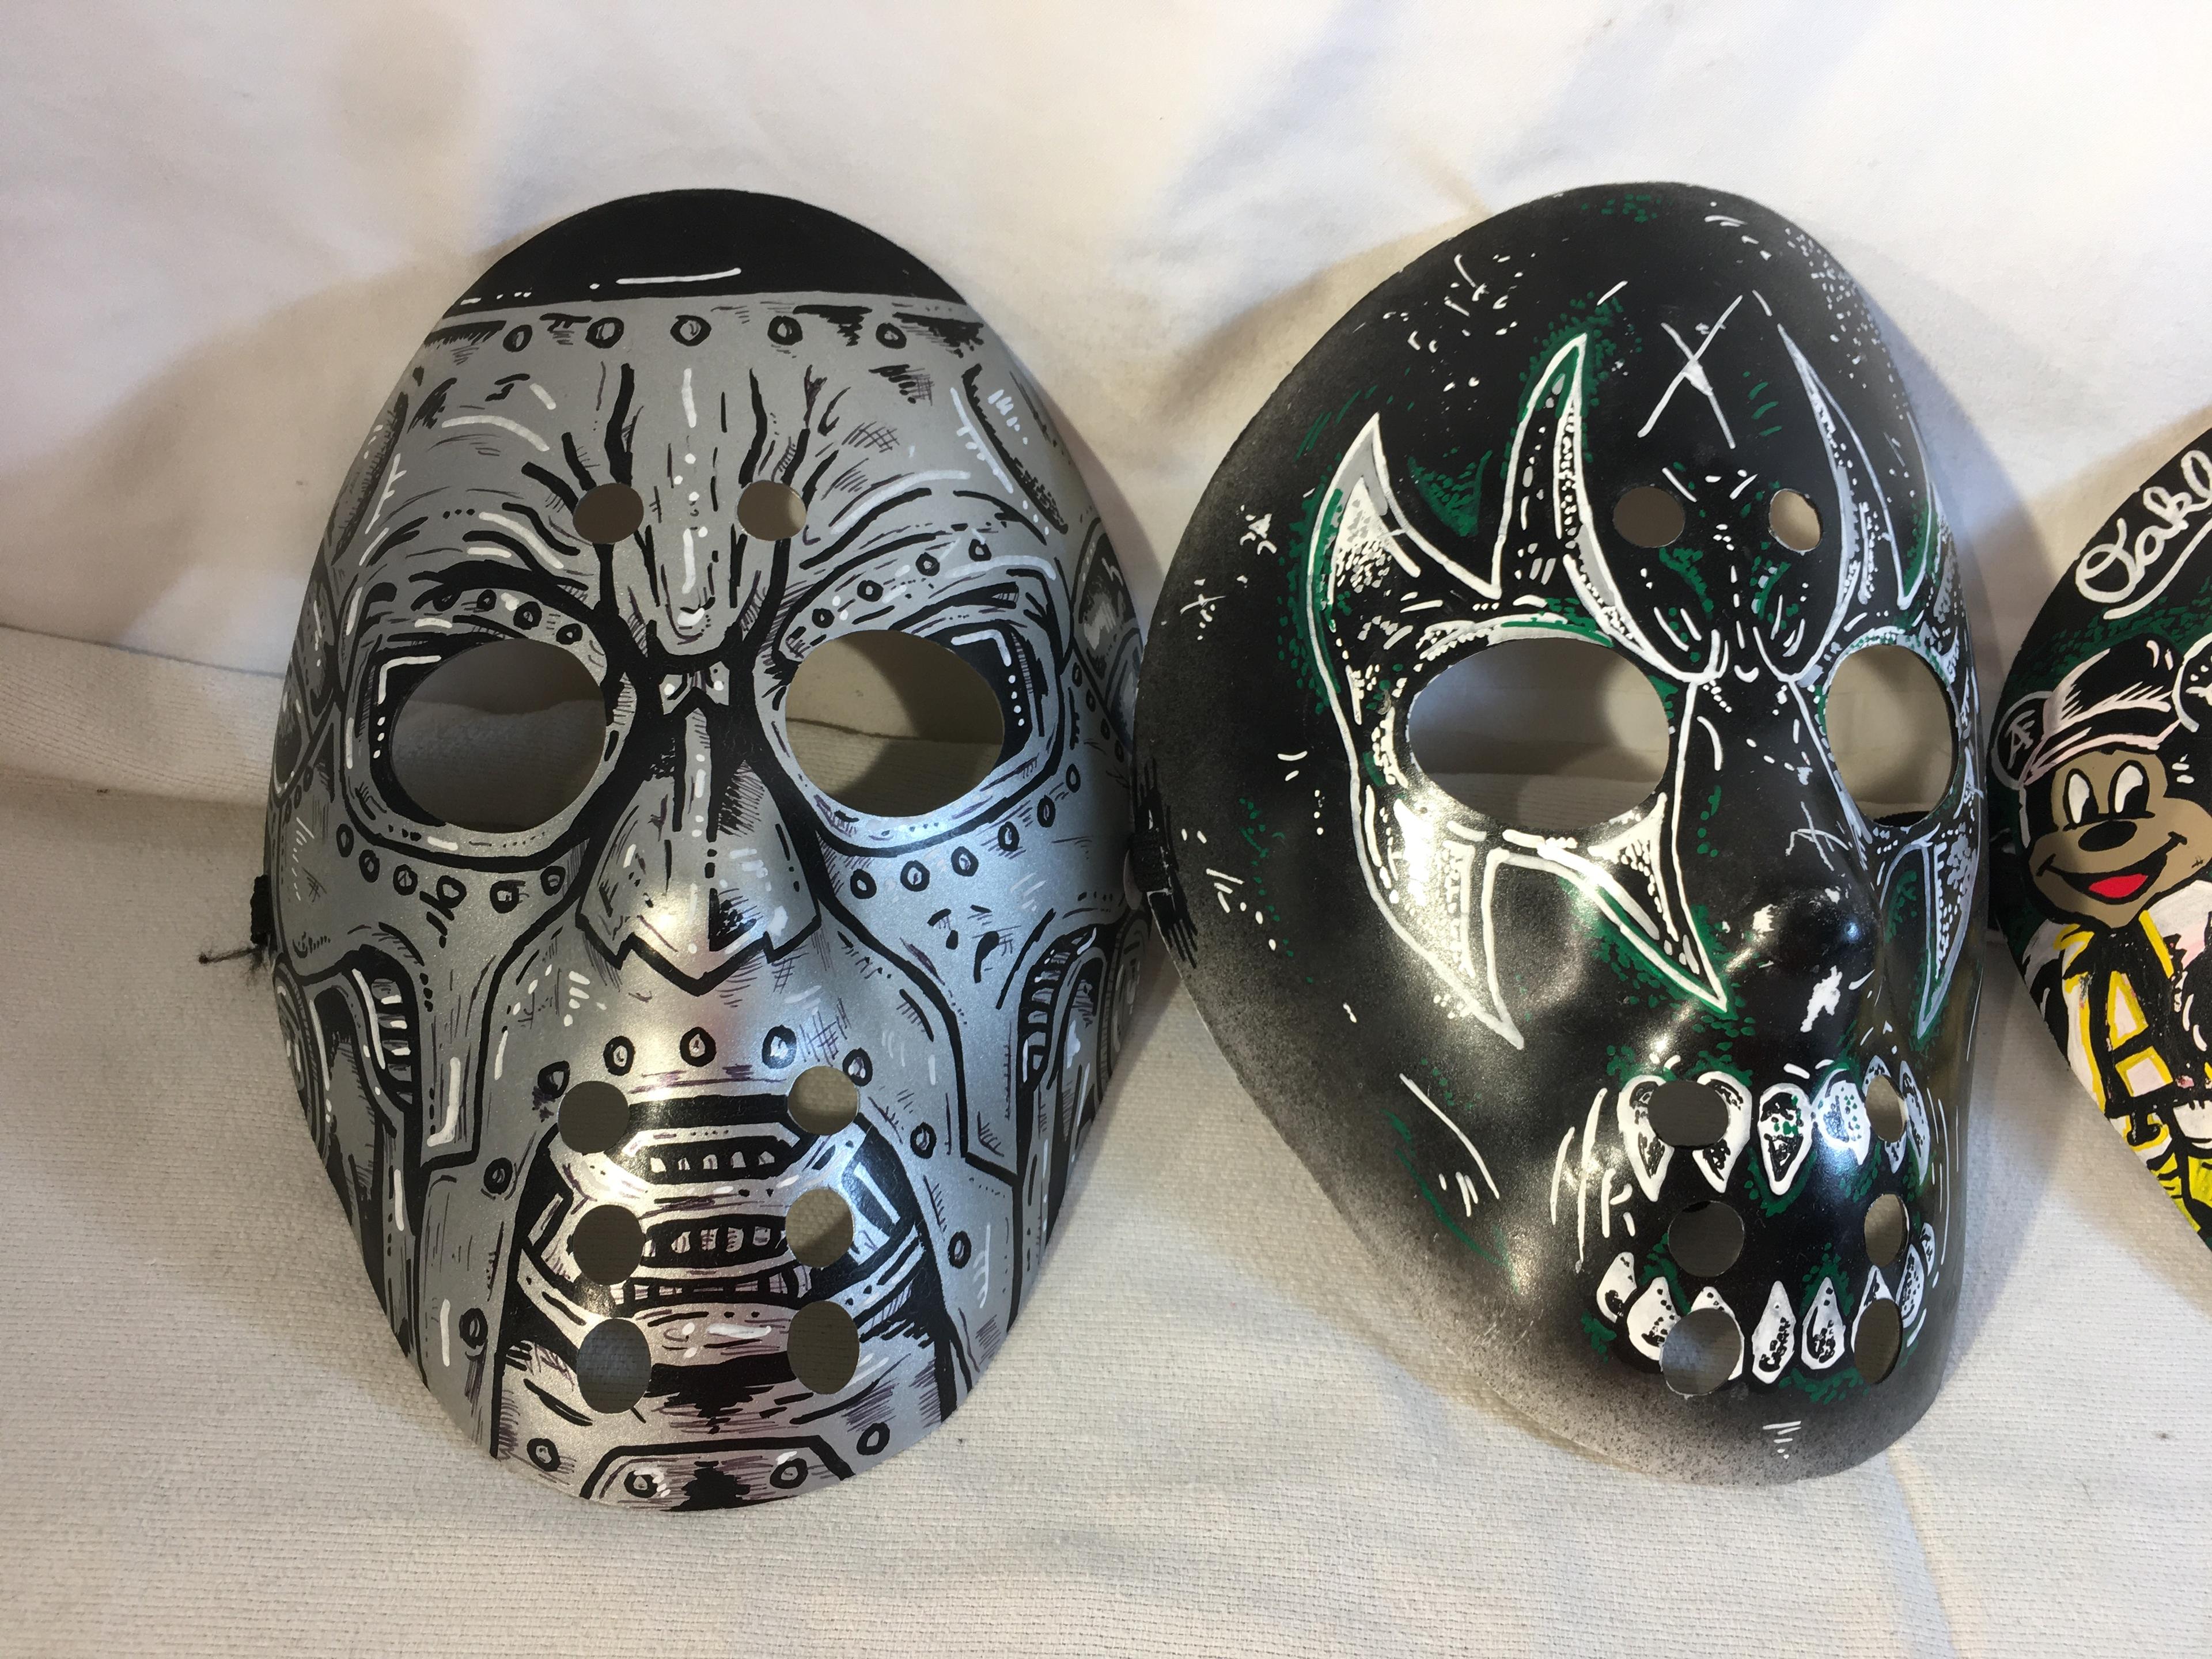 Lot of 3 Pcs Collector Loose Handpainted Mask - See Pictures Hard Plastic Made